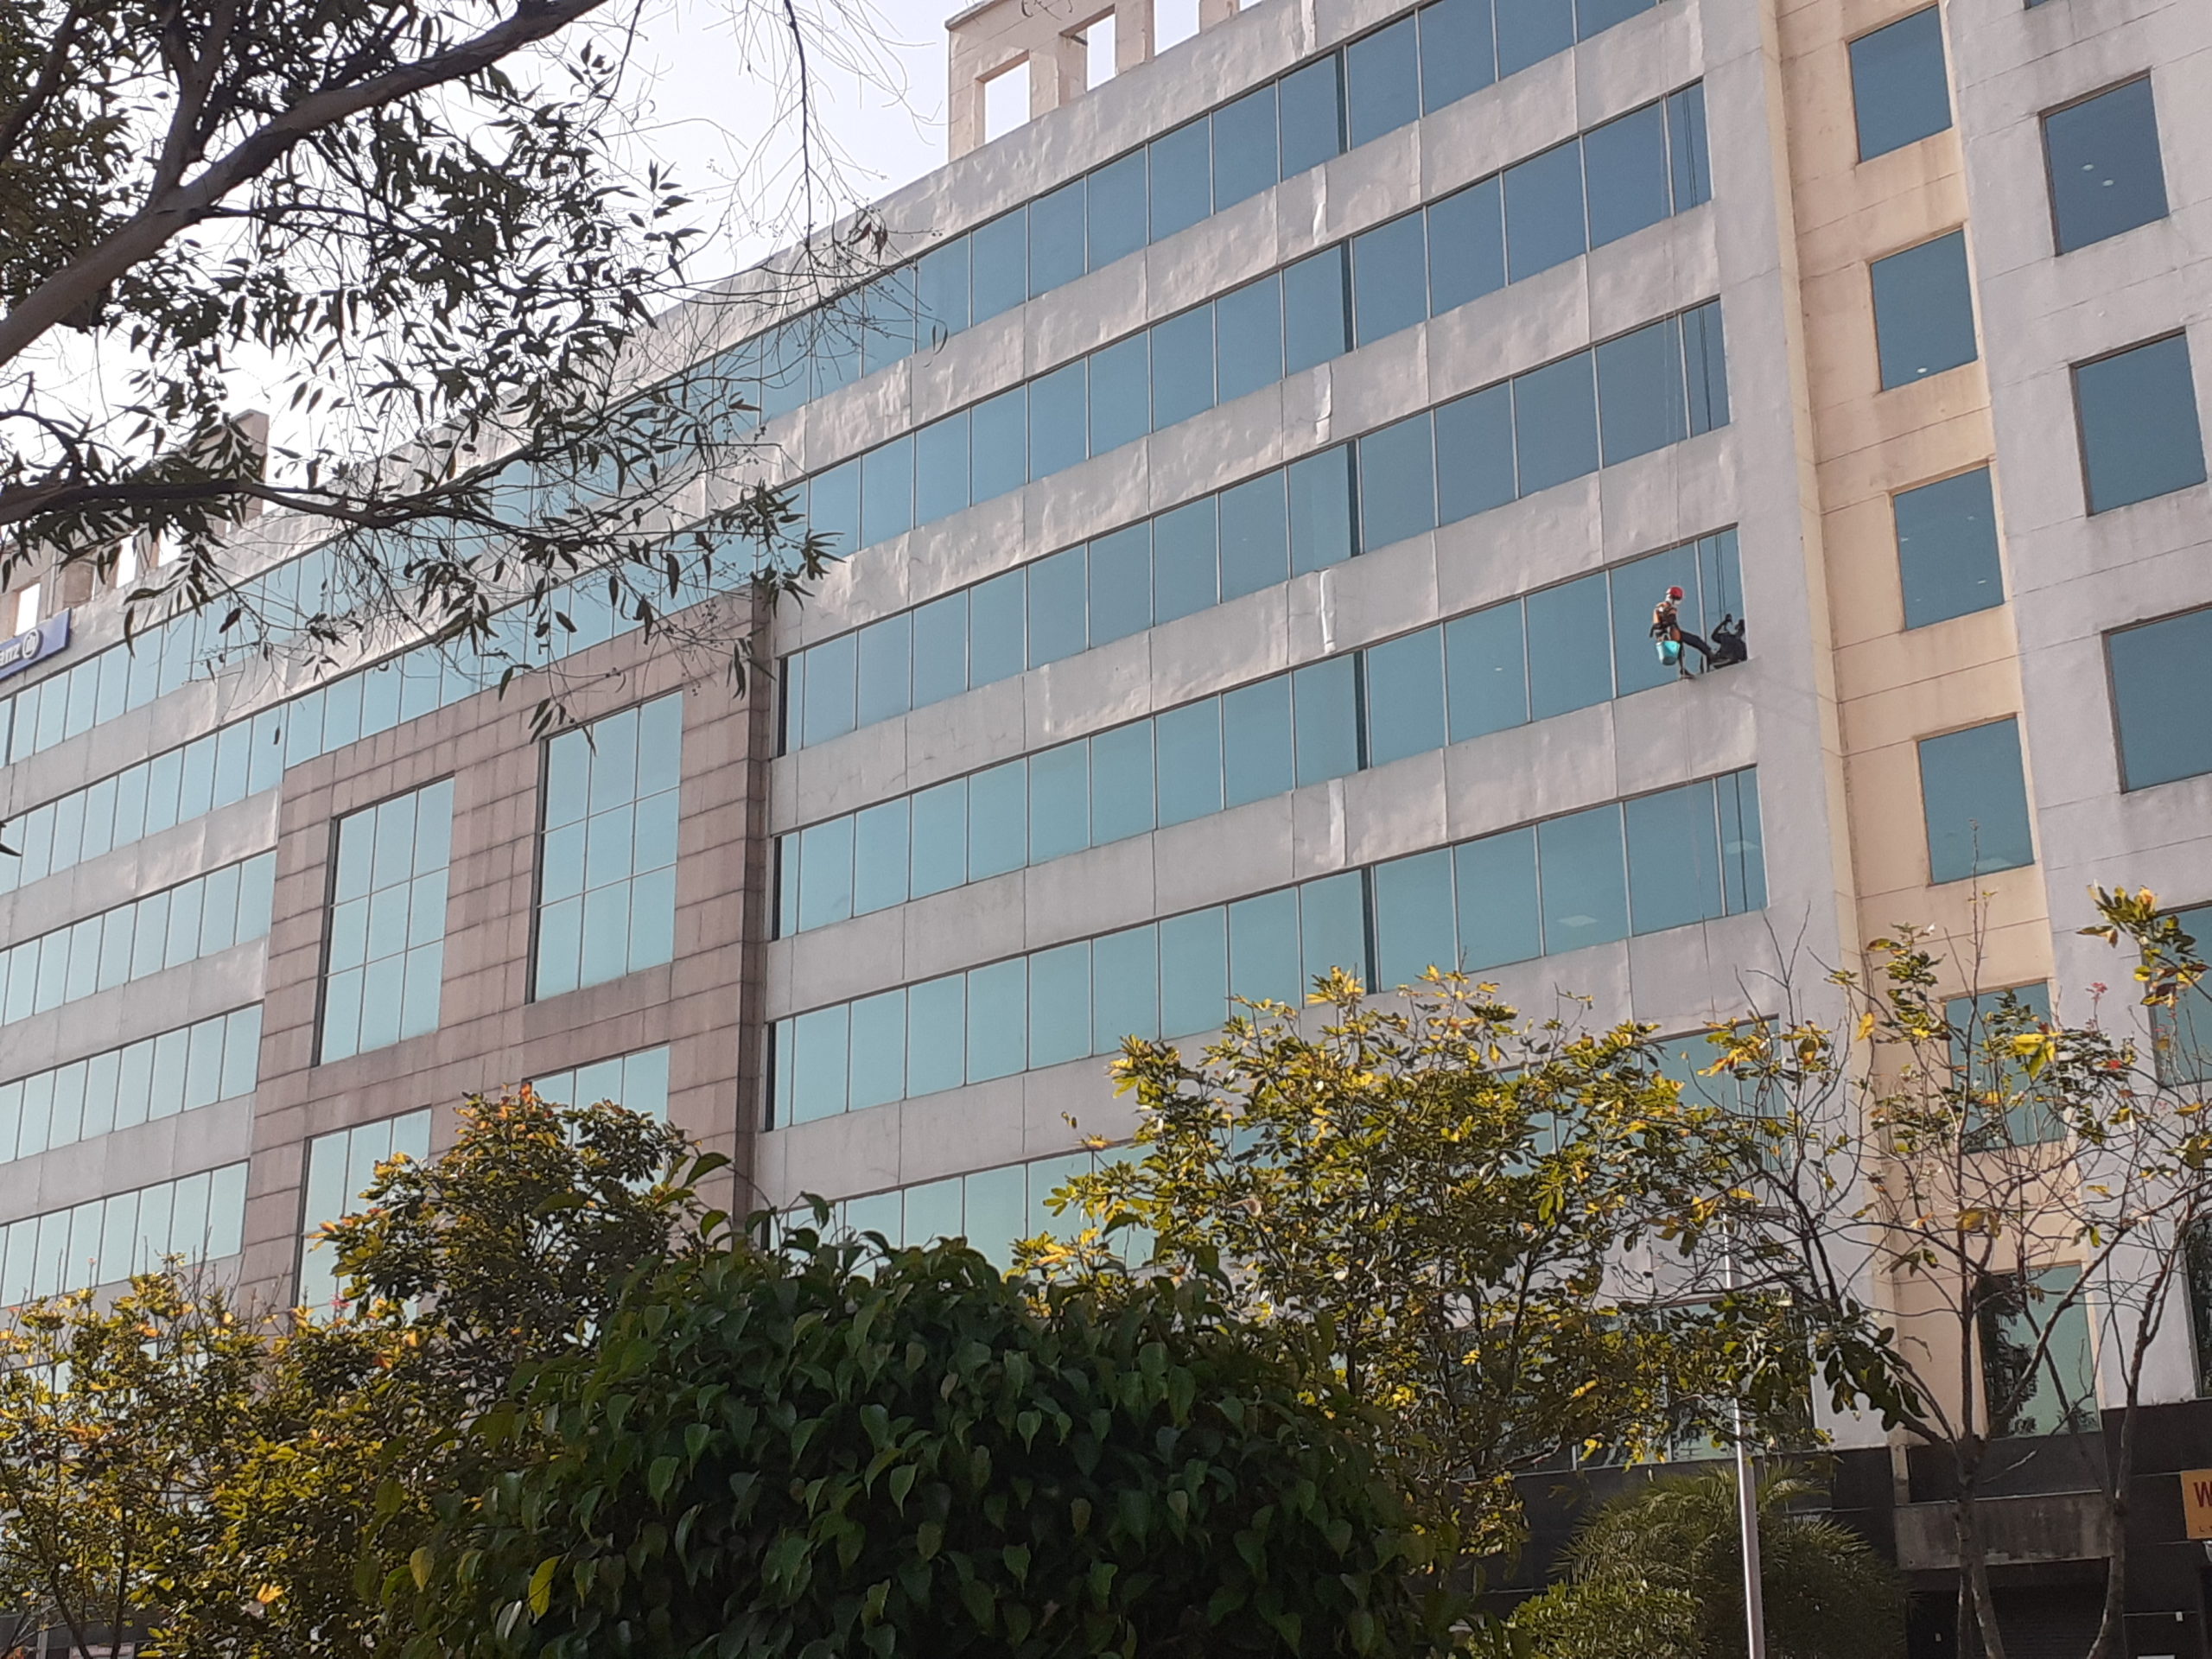 DLF COMMERCIAL OFFICE SPACE TOWER